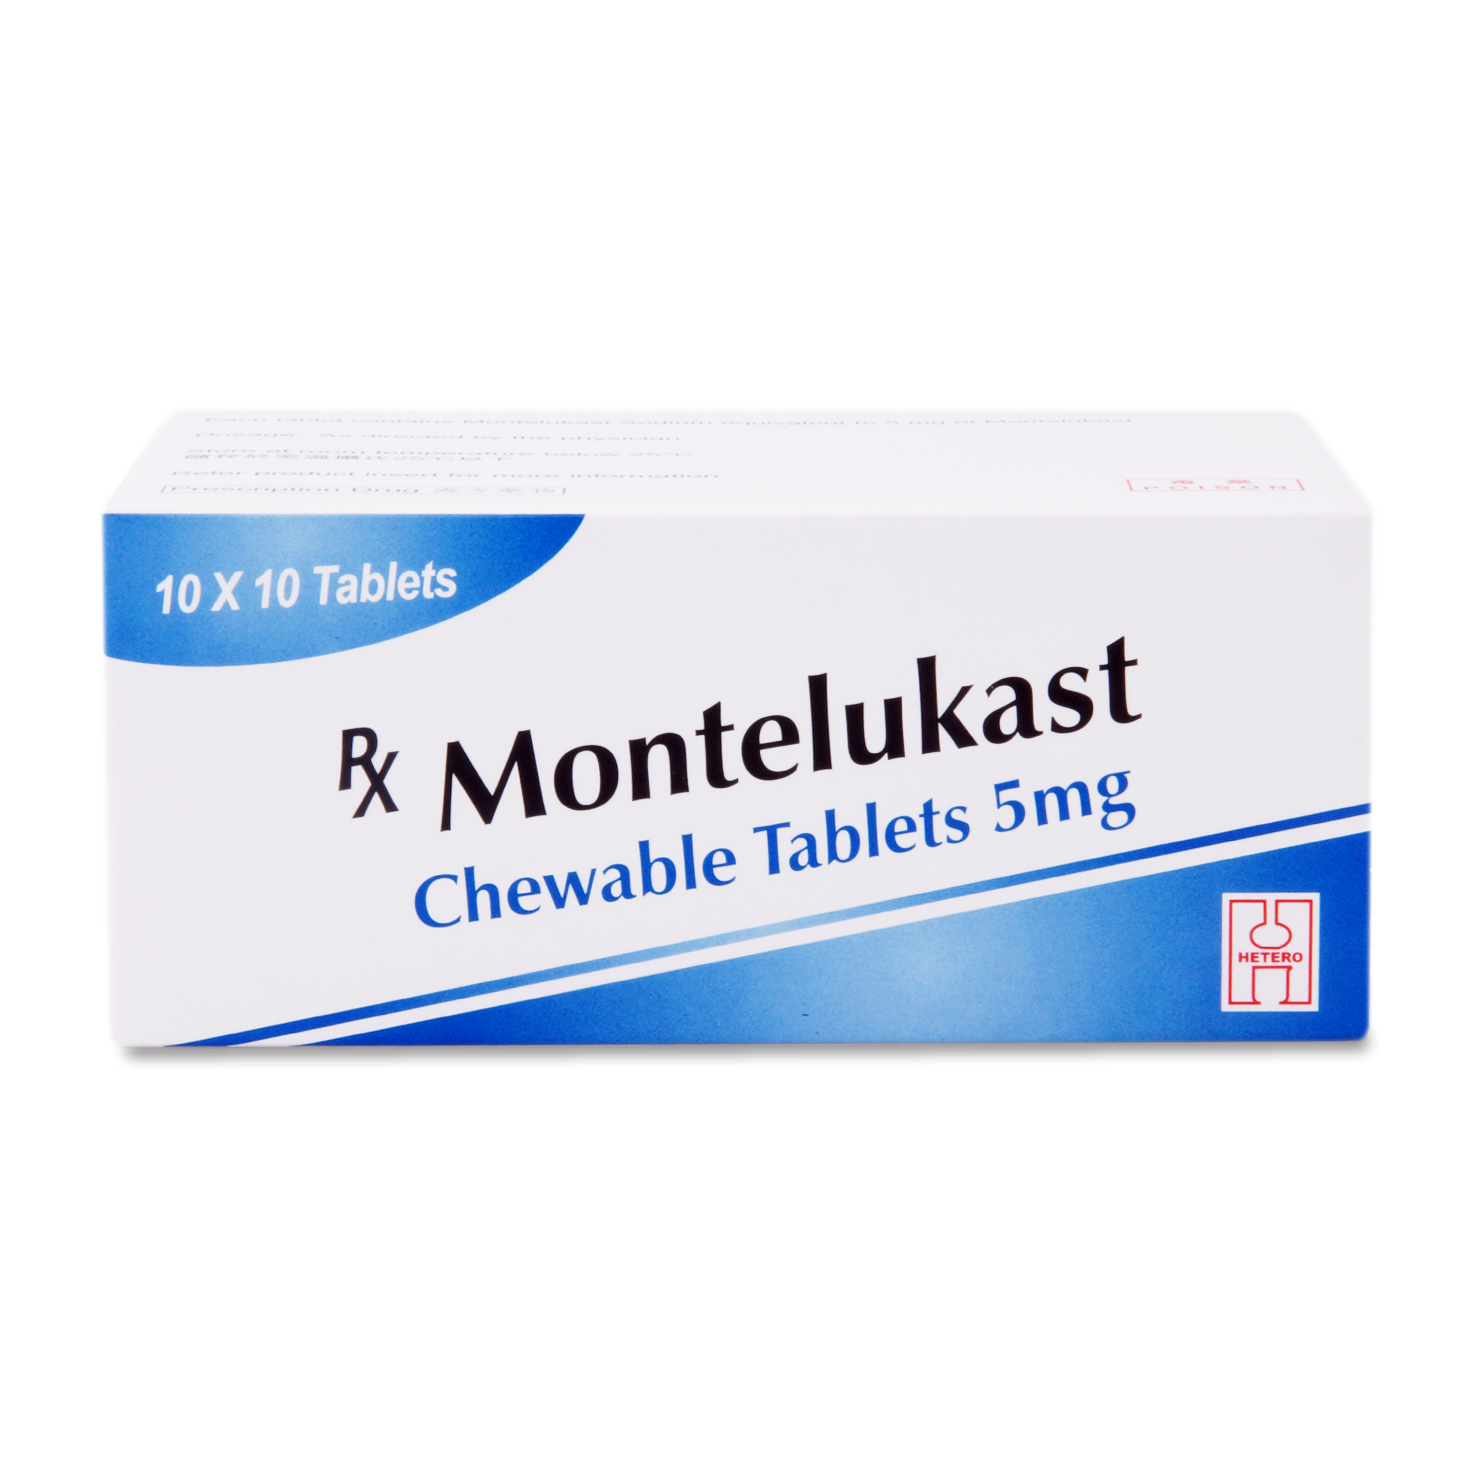 Montelukast Chewable Tablets 5mg 10 x 10's (P1S1S3)